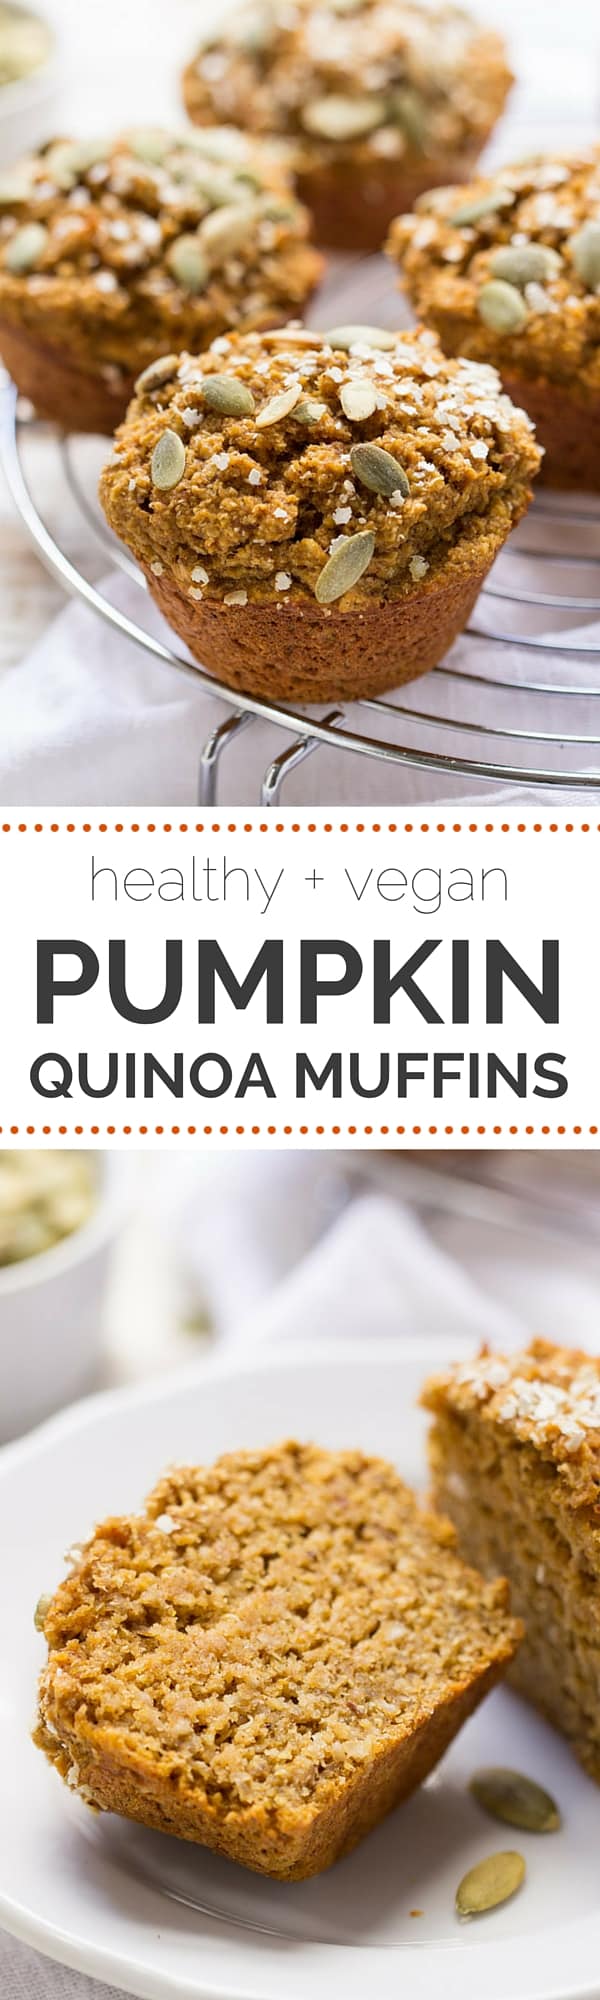 Healthy Pumpkin Quinoa Muffins - sweetened naturally, made without any oils, AND they're gluten-free + vegan | recipe on simplyquinoa.com